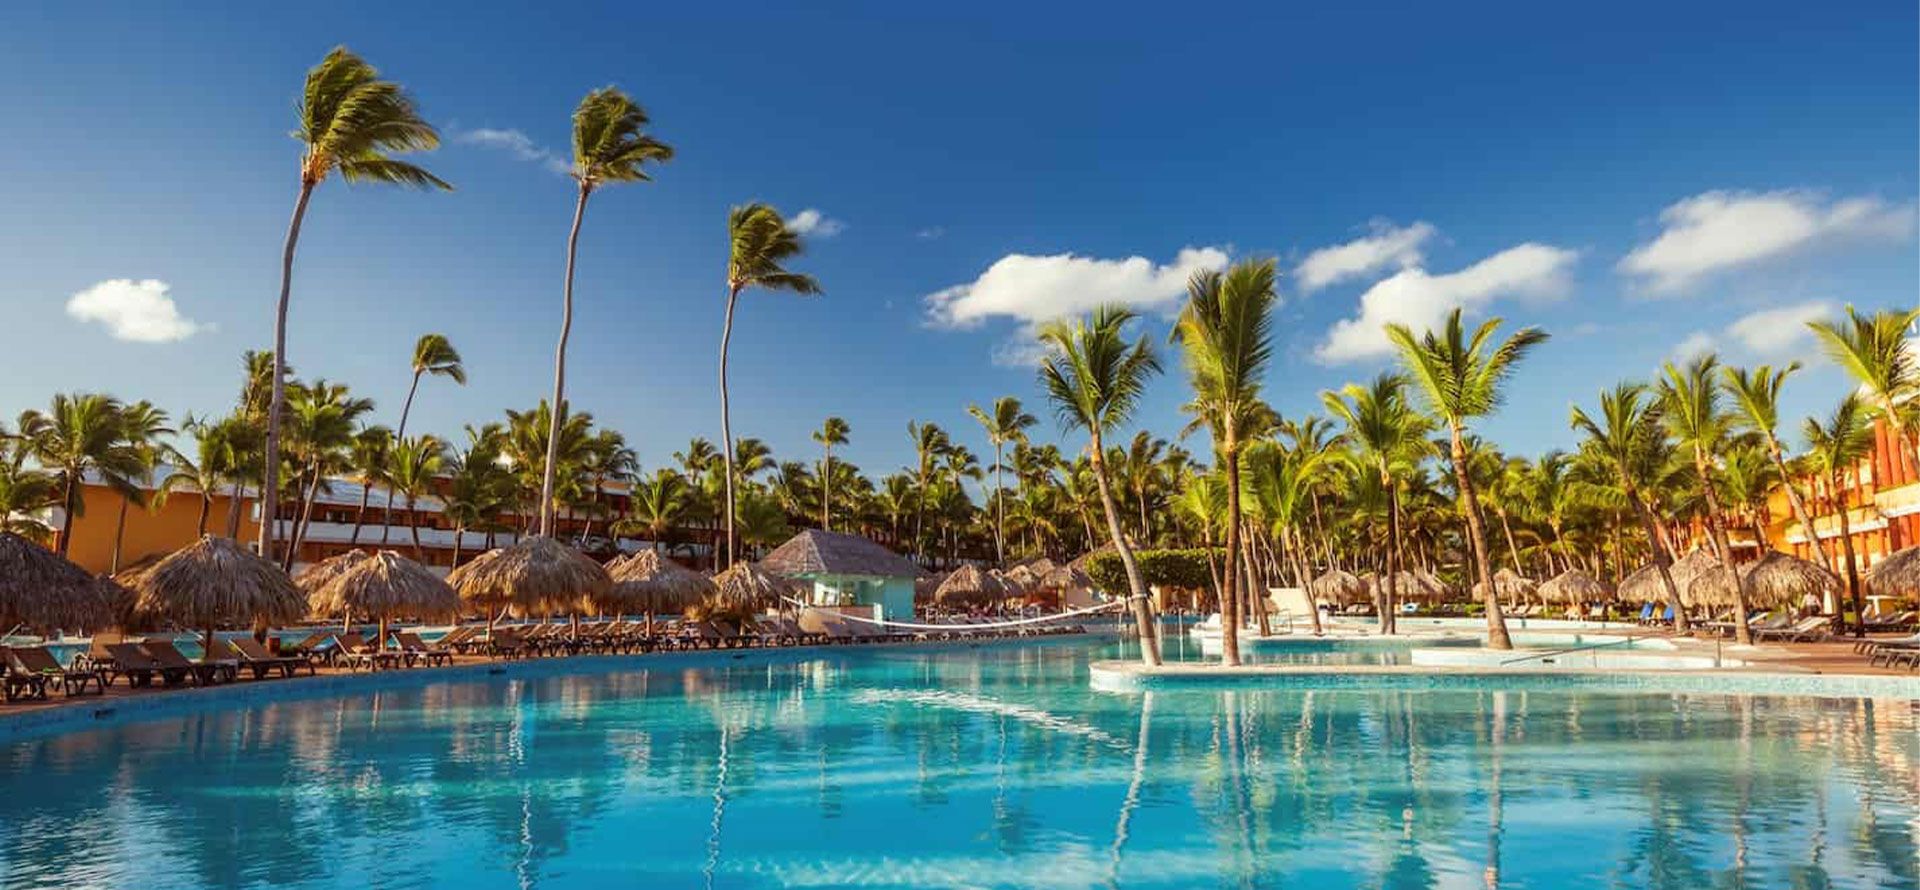 Punta cana all-inclusive resort for families.